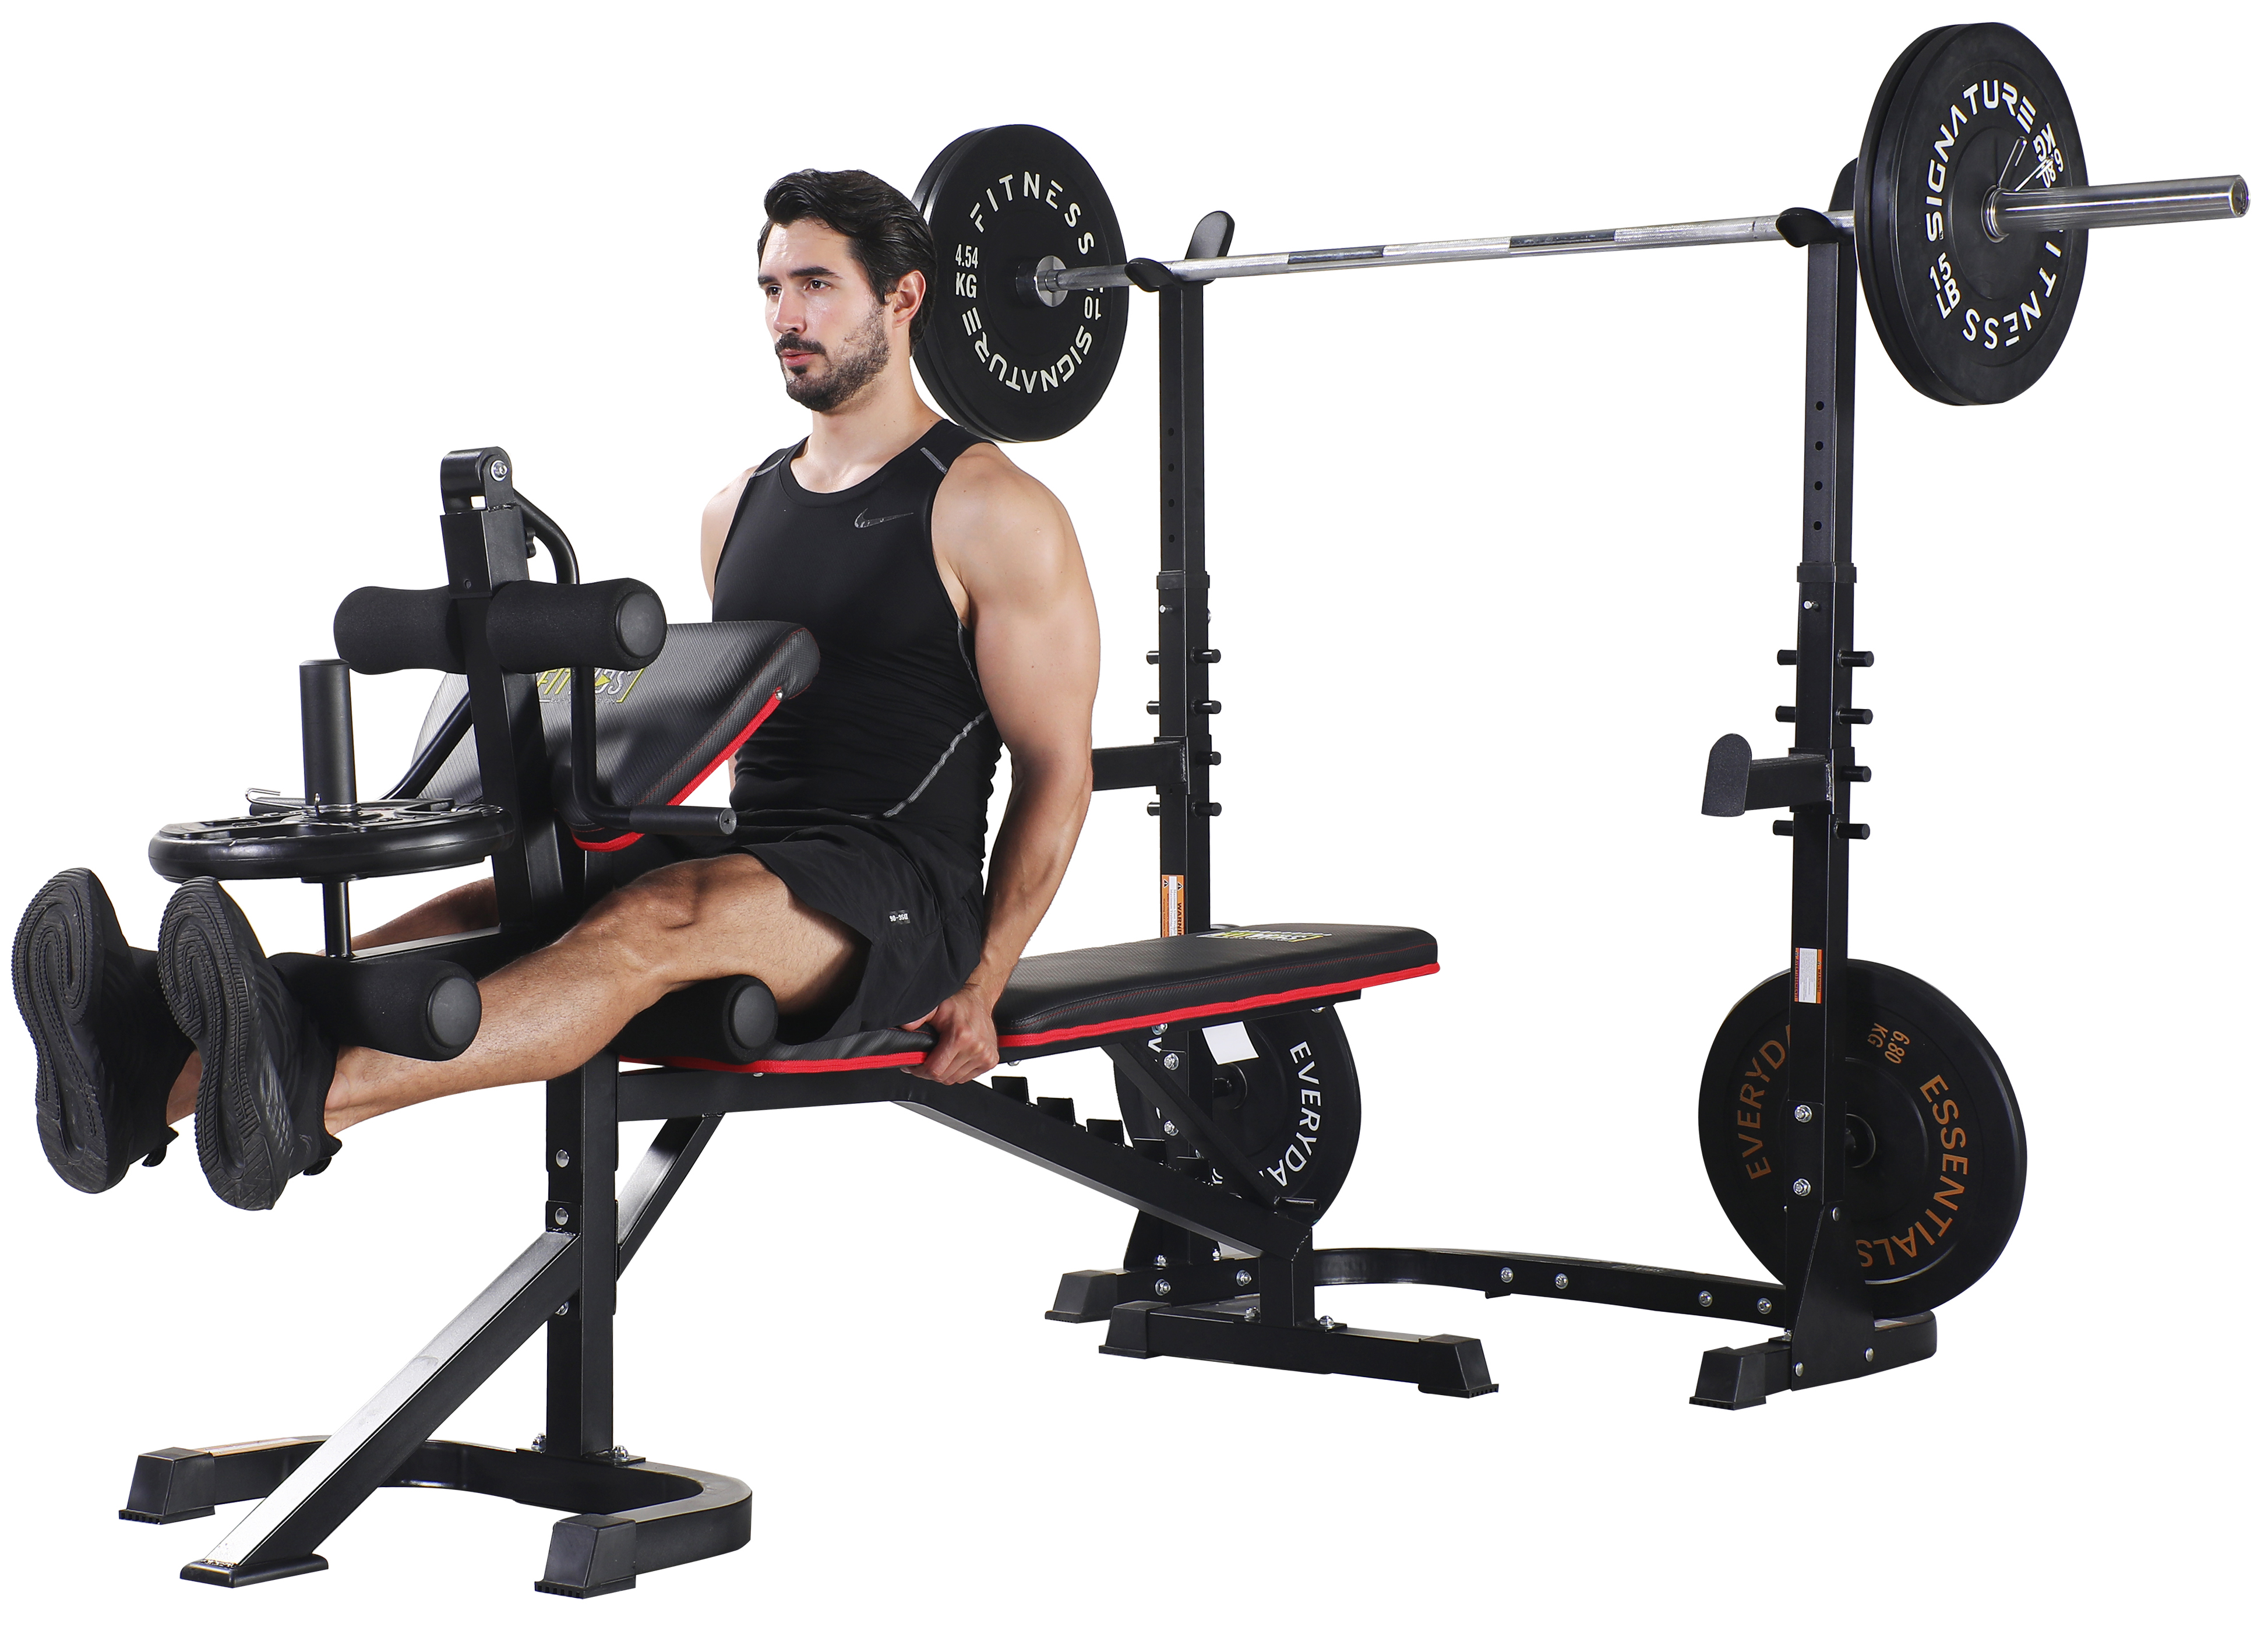 Fitvids LX600 Adjustable Olympic Workout Bench with Squat Rack, Leg Extension, Preacher Curl, and Weight Storage, 800-Pound Capacity (Barbell and weights not included) - image 4 of 10